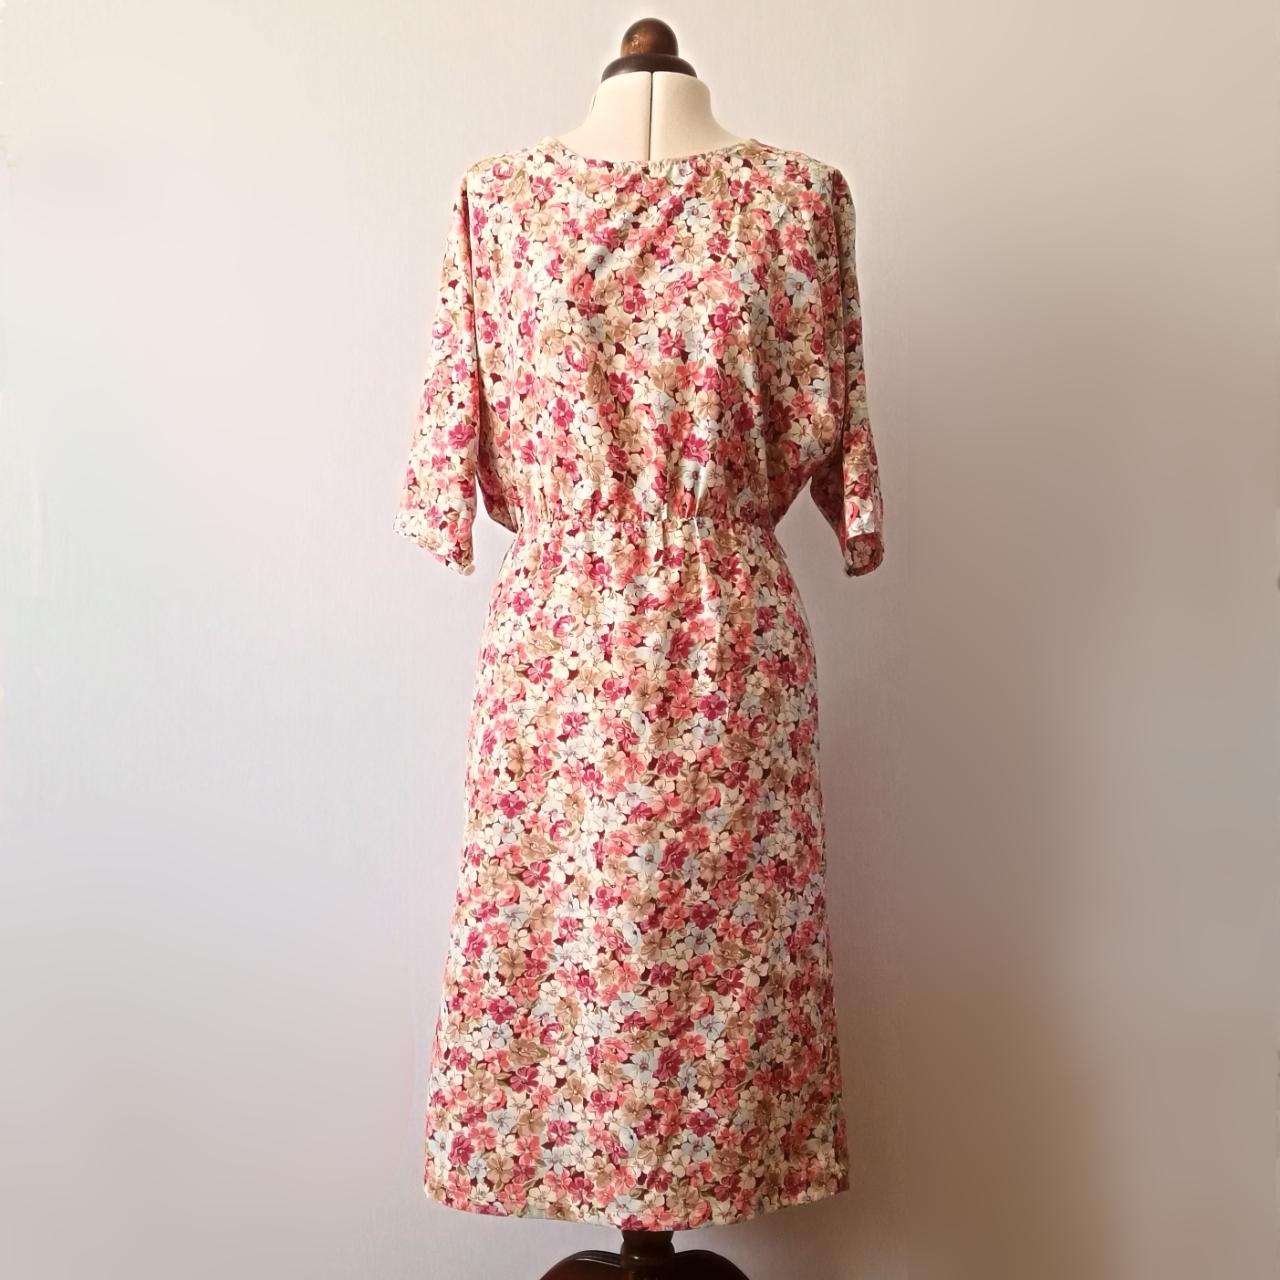 This lovely, floral, 80s, Wallis dress is a... - Depop